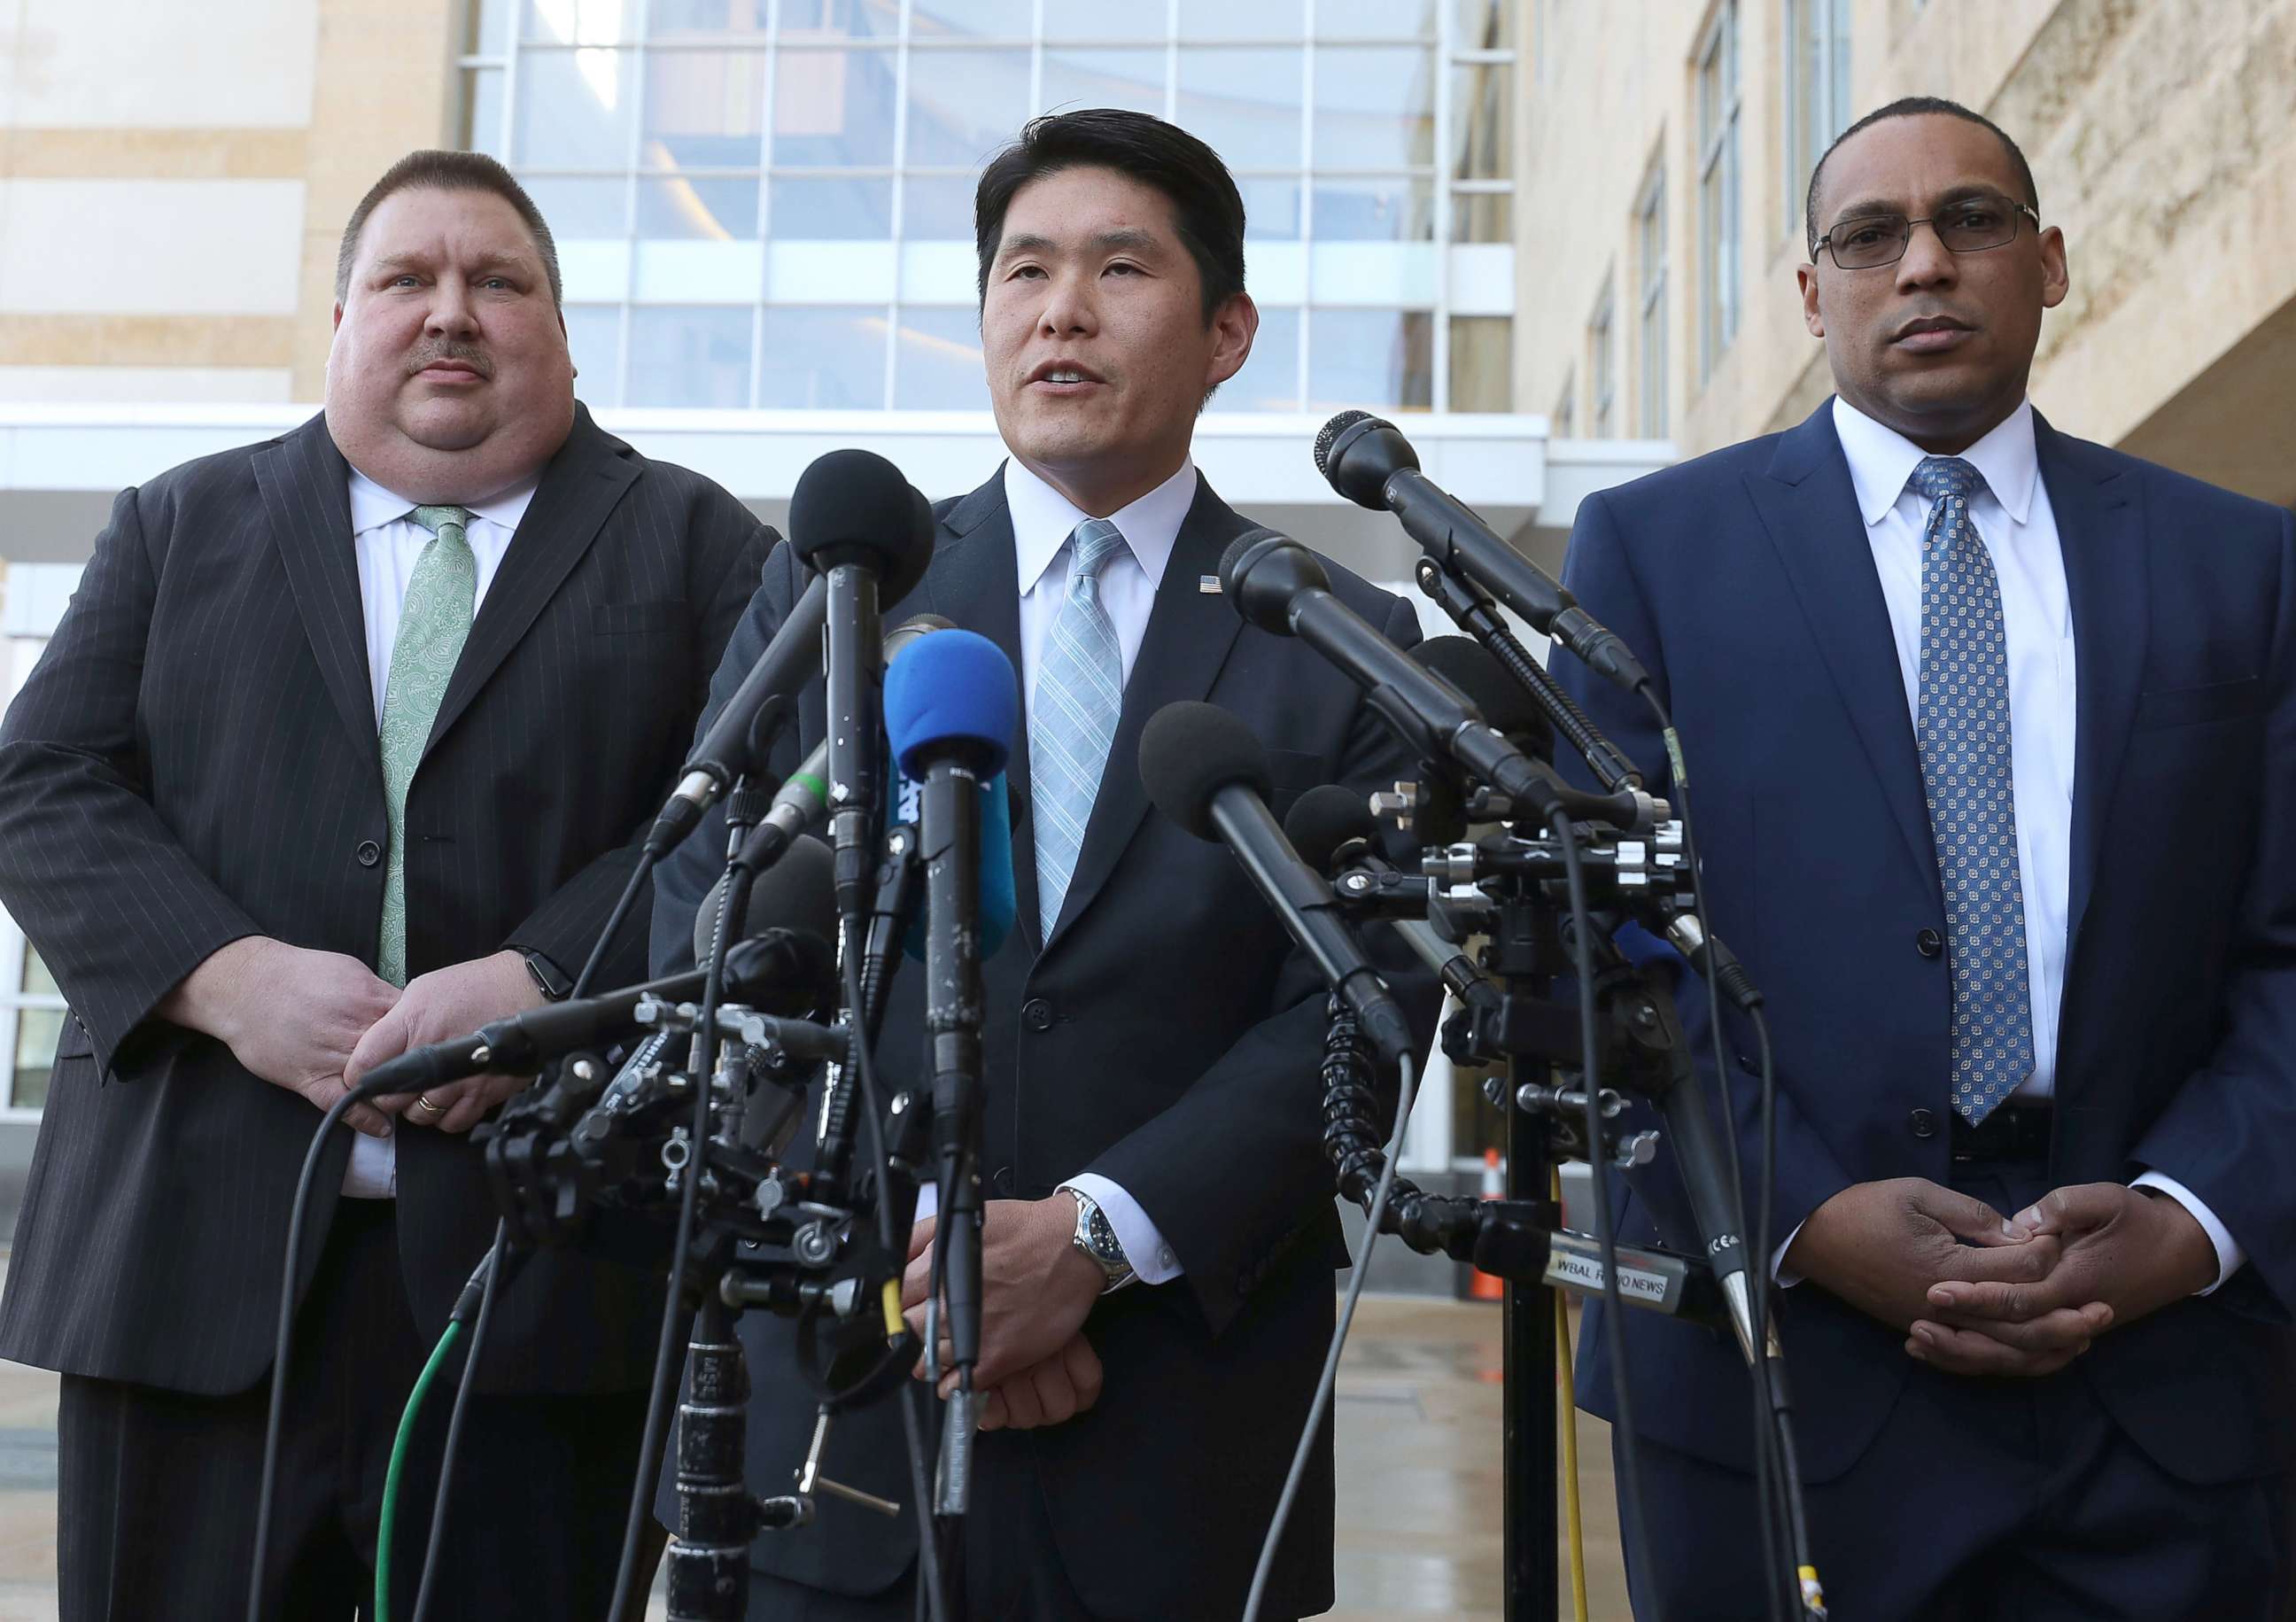 PHOTO: U.S. Attorney Robert Hur, center, speaks while flanked by FBI Special Agent Gordon Johnson and Art Walker, of the Coast Guard Investigative Service, after a hearing at the U.S. District Court Greenbelt Division, Feb. 21, 2019, in Greenbelt, Md.